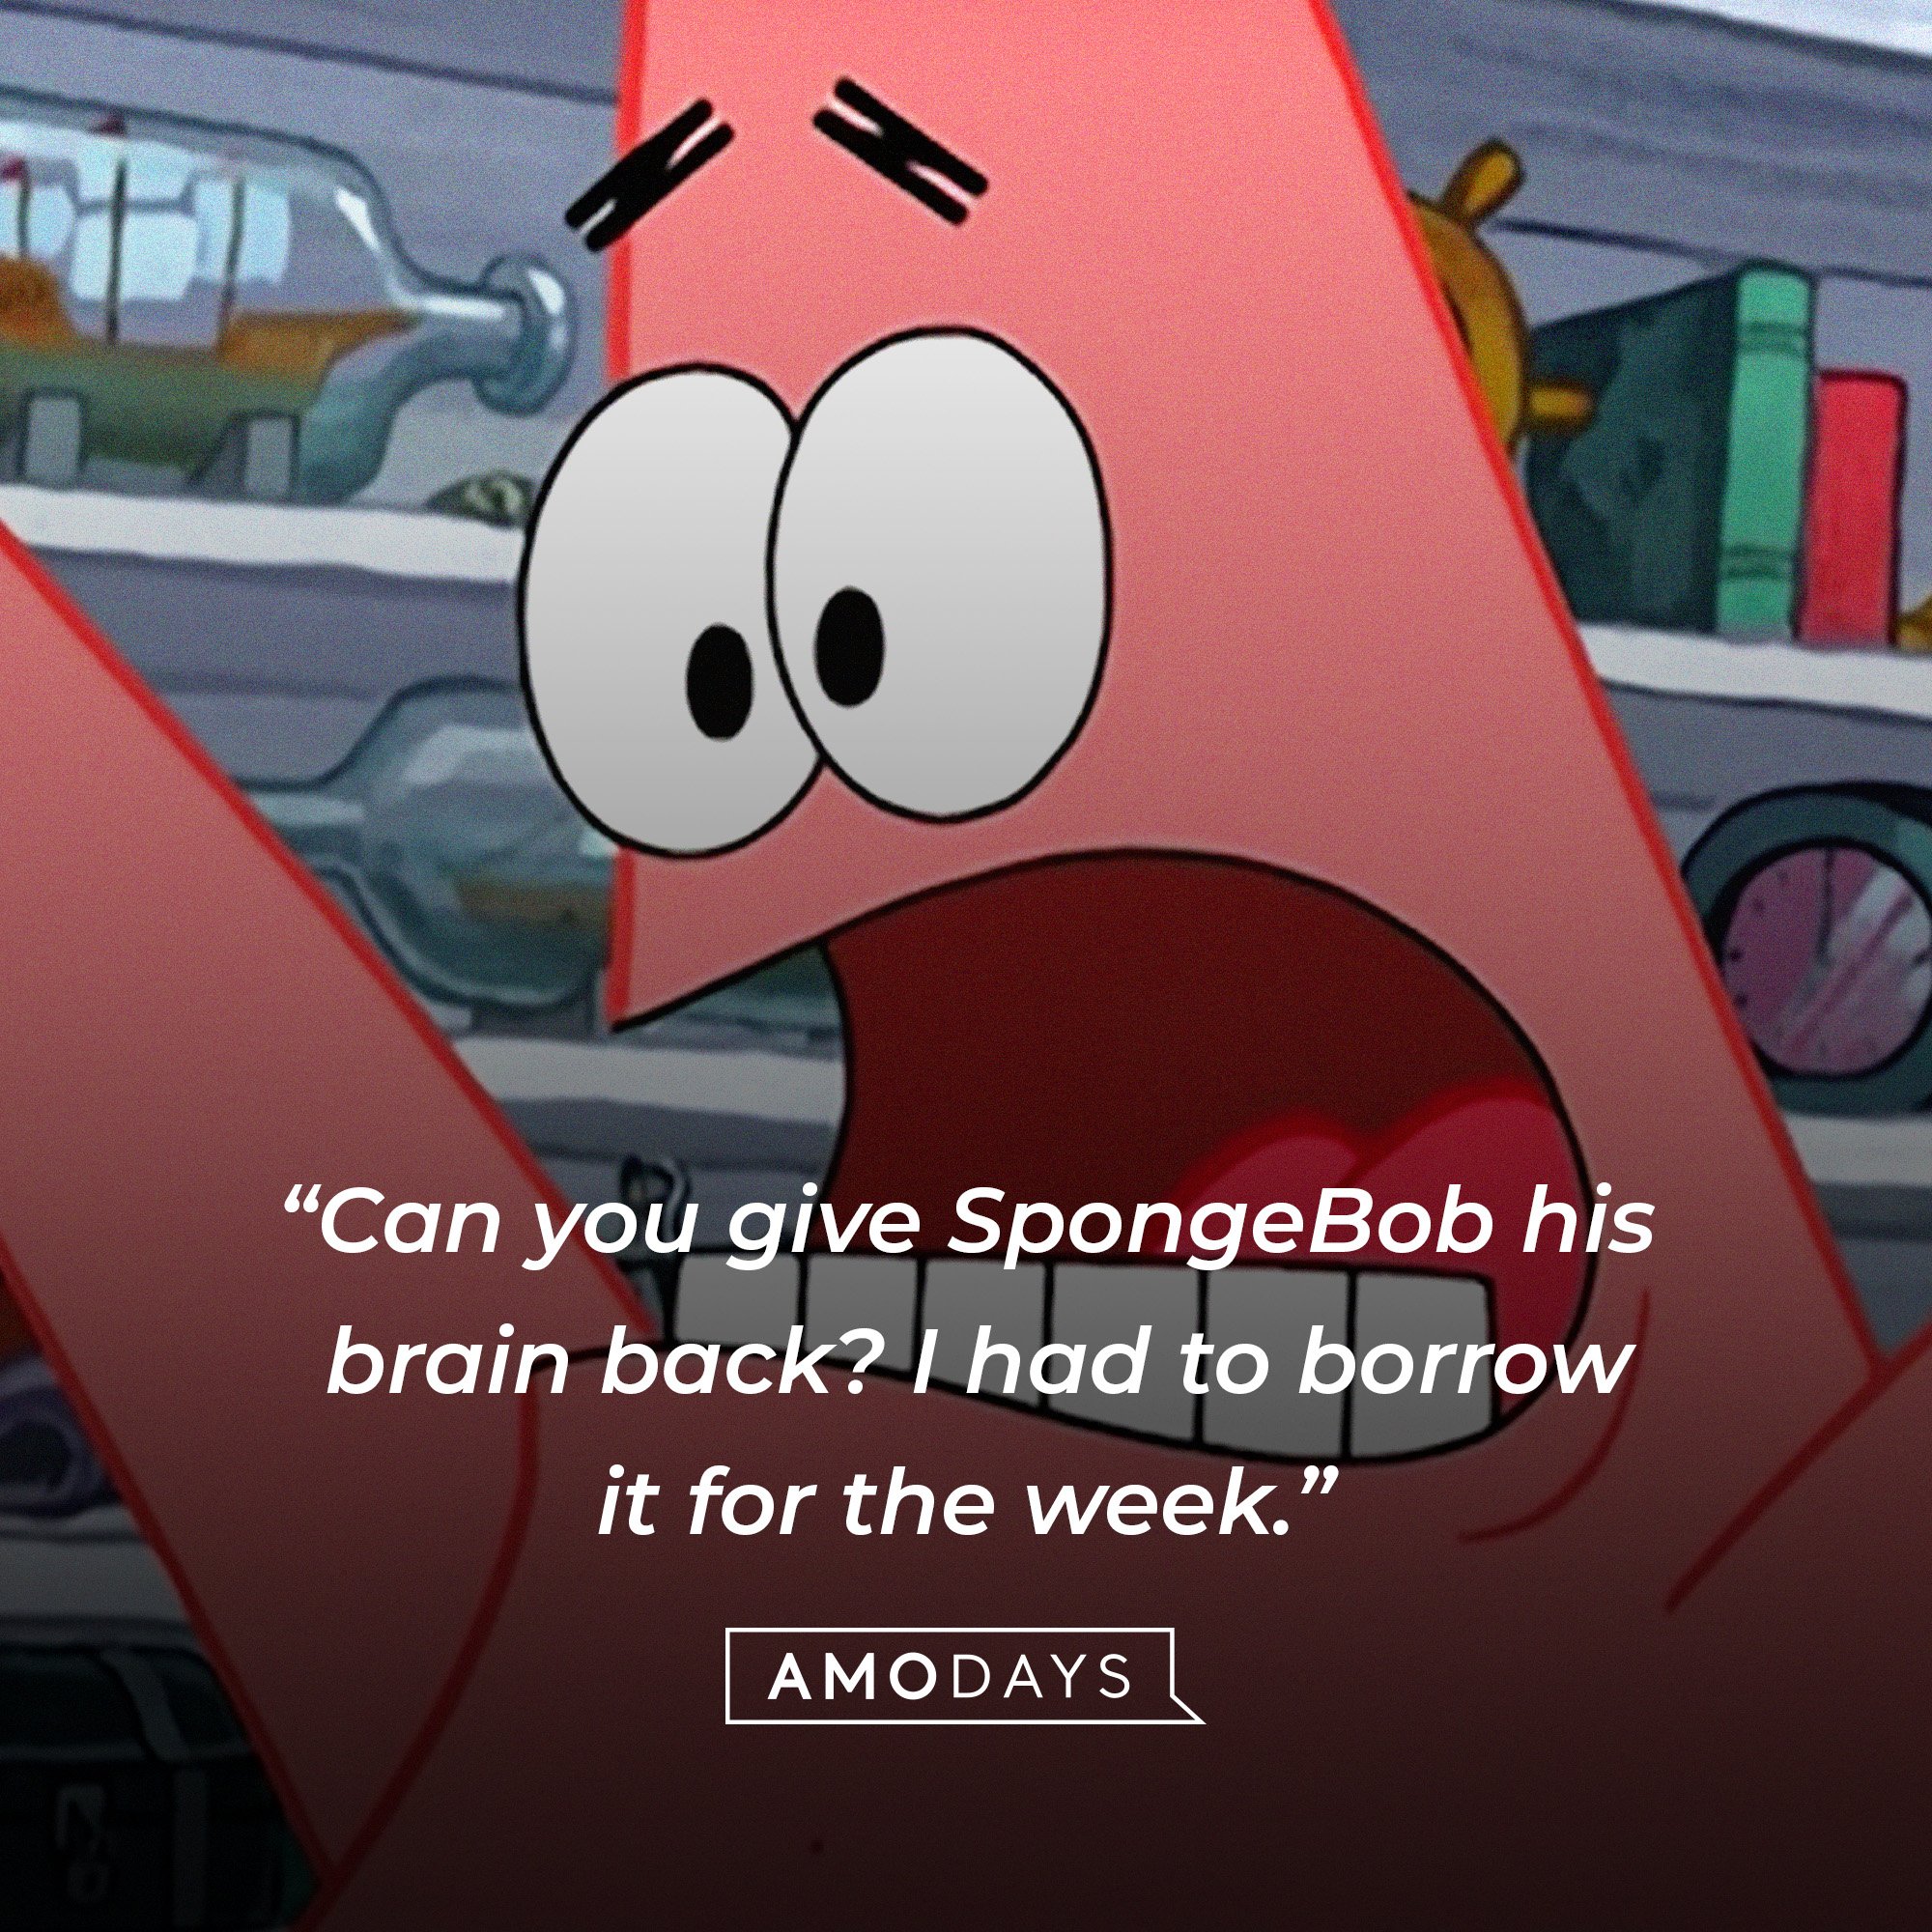 Patrick Star’s quote: “Can you give SpongeBob his brain back? I had to borrow it for the week.” | Image: AmoDays